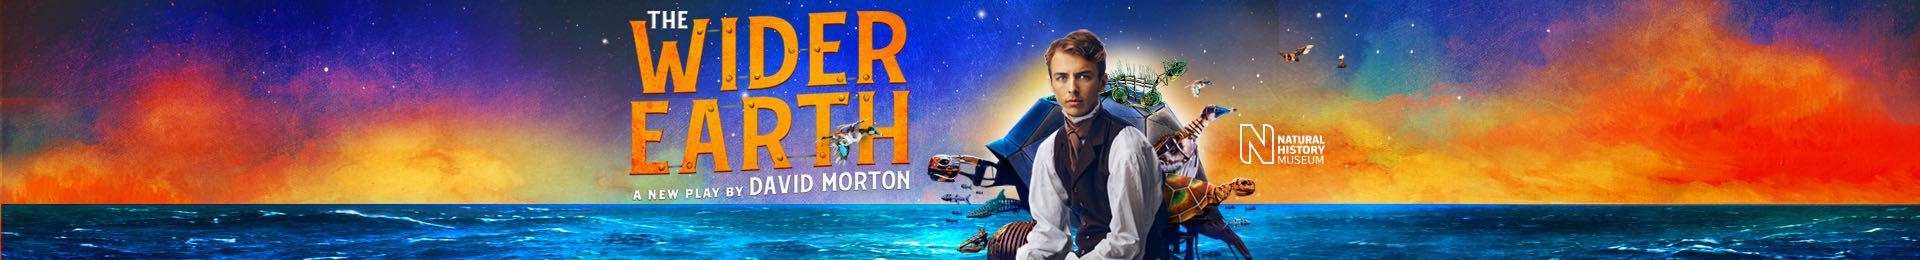 The Wider Earth banner image